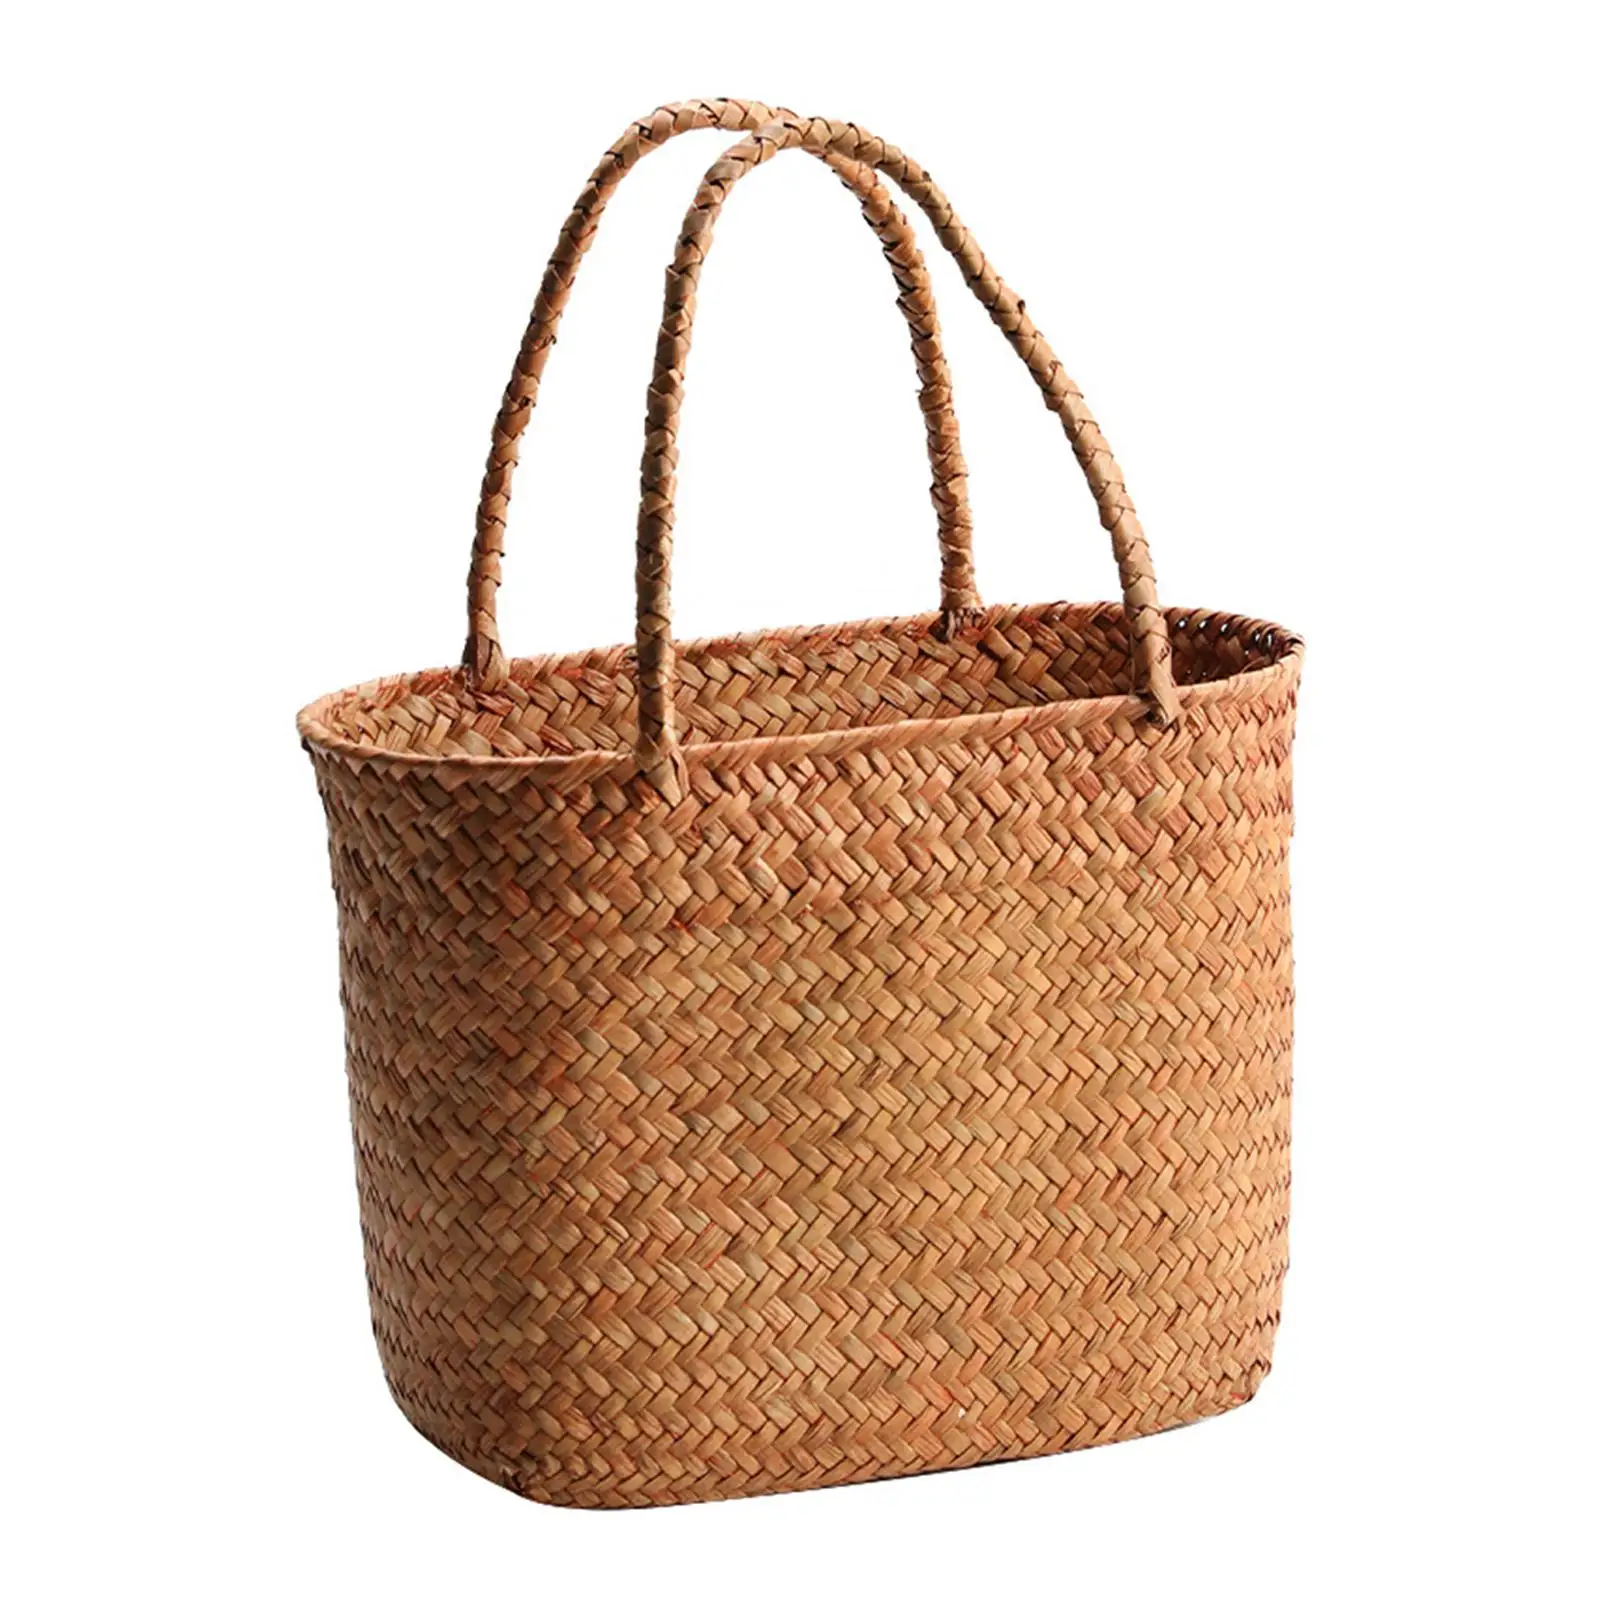 Outdoor Picnic Basket Picnic Hamper Woven Grocery Baskets Double Handles Shopping Basket for Hiking Beach Camping Outdoor